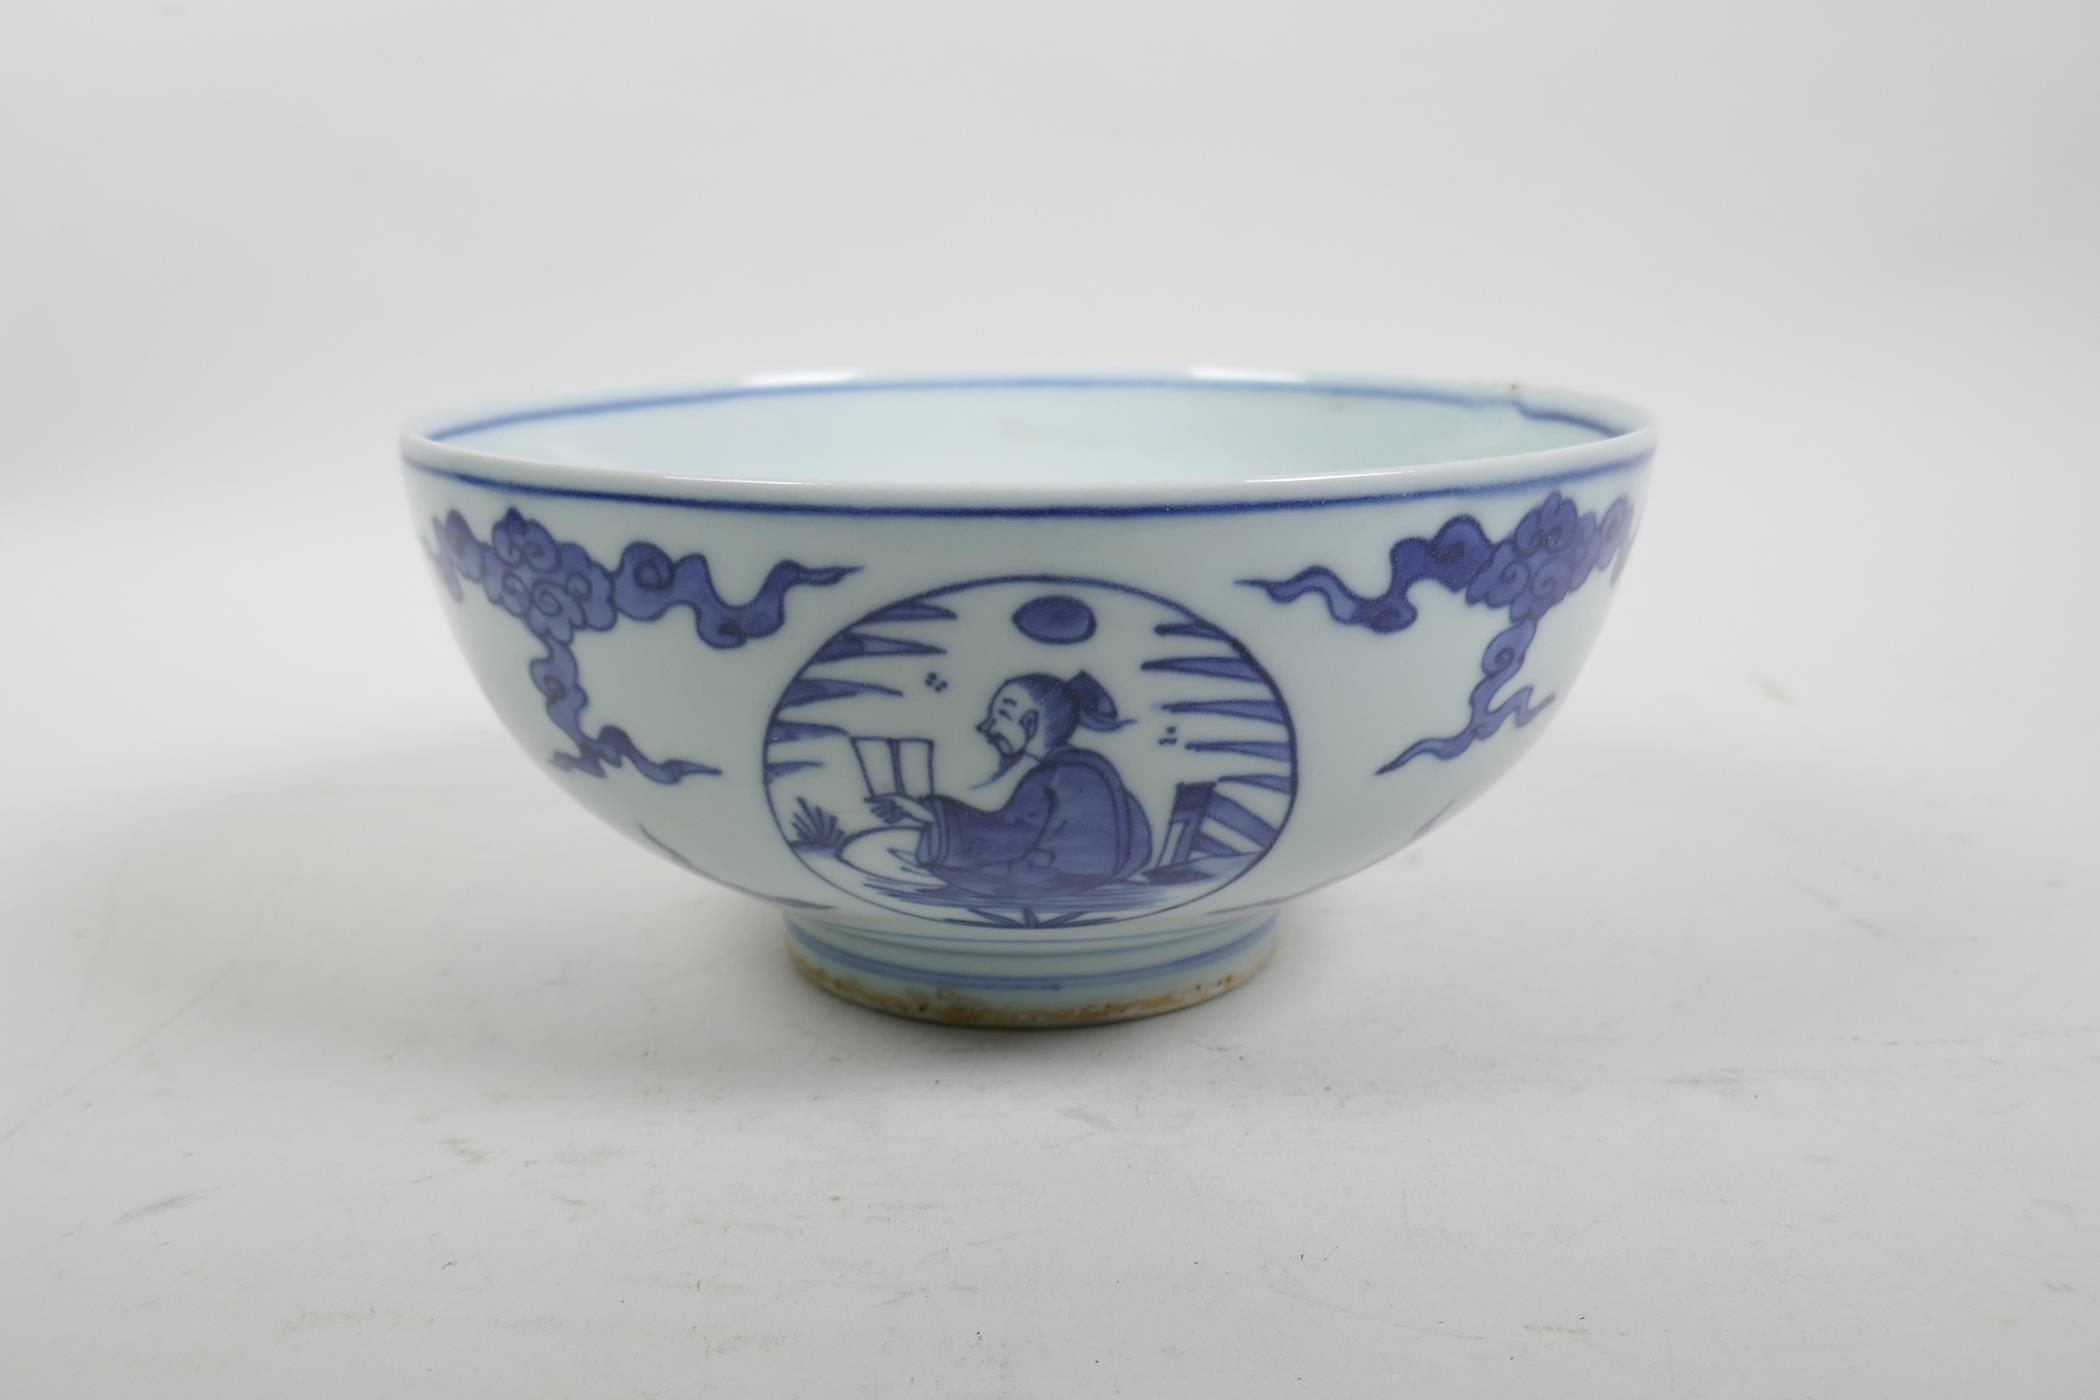 A Chinese blue and white bowl with decorative figural panels, 4 character mark to base, 8" diameter